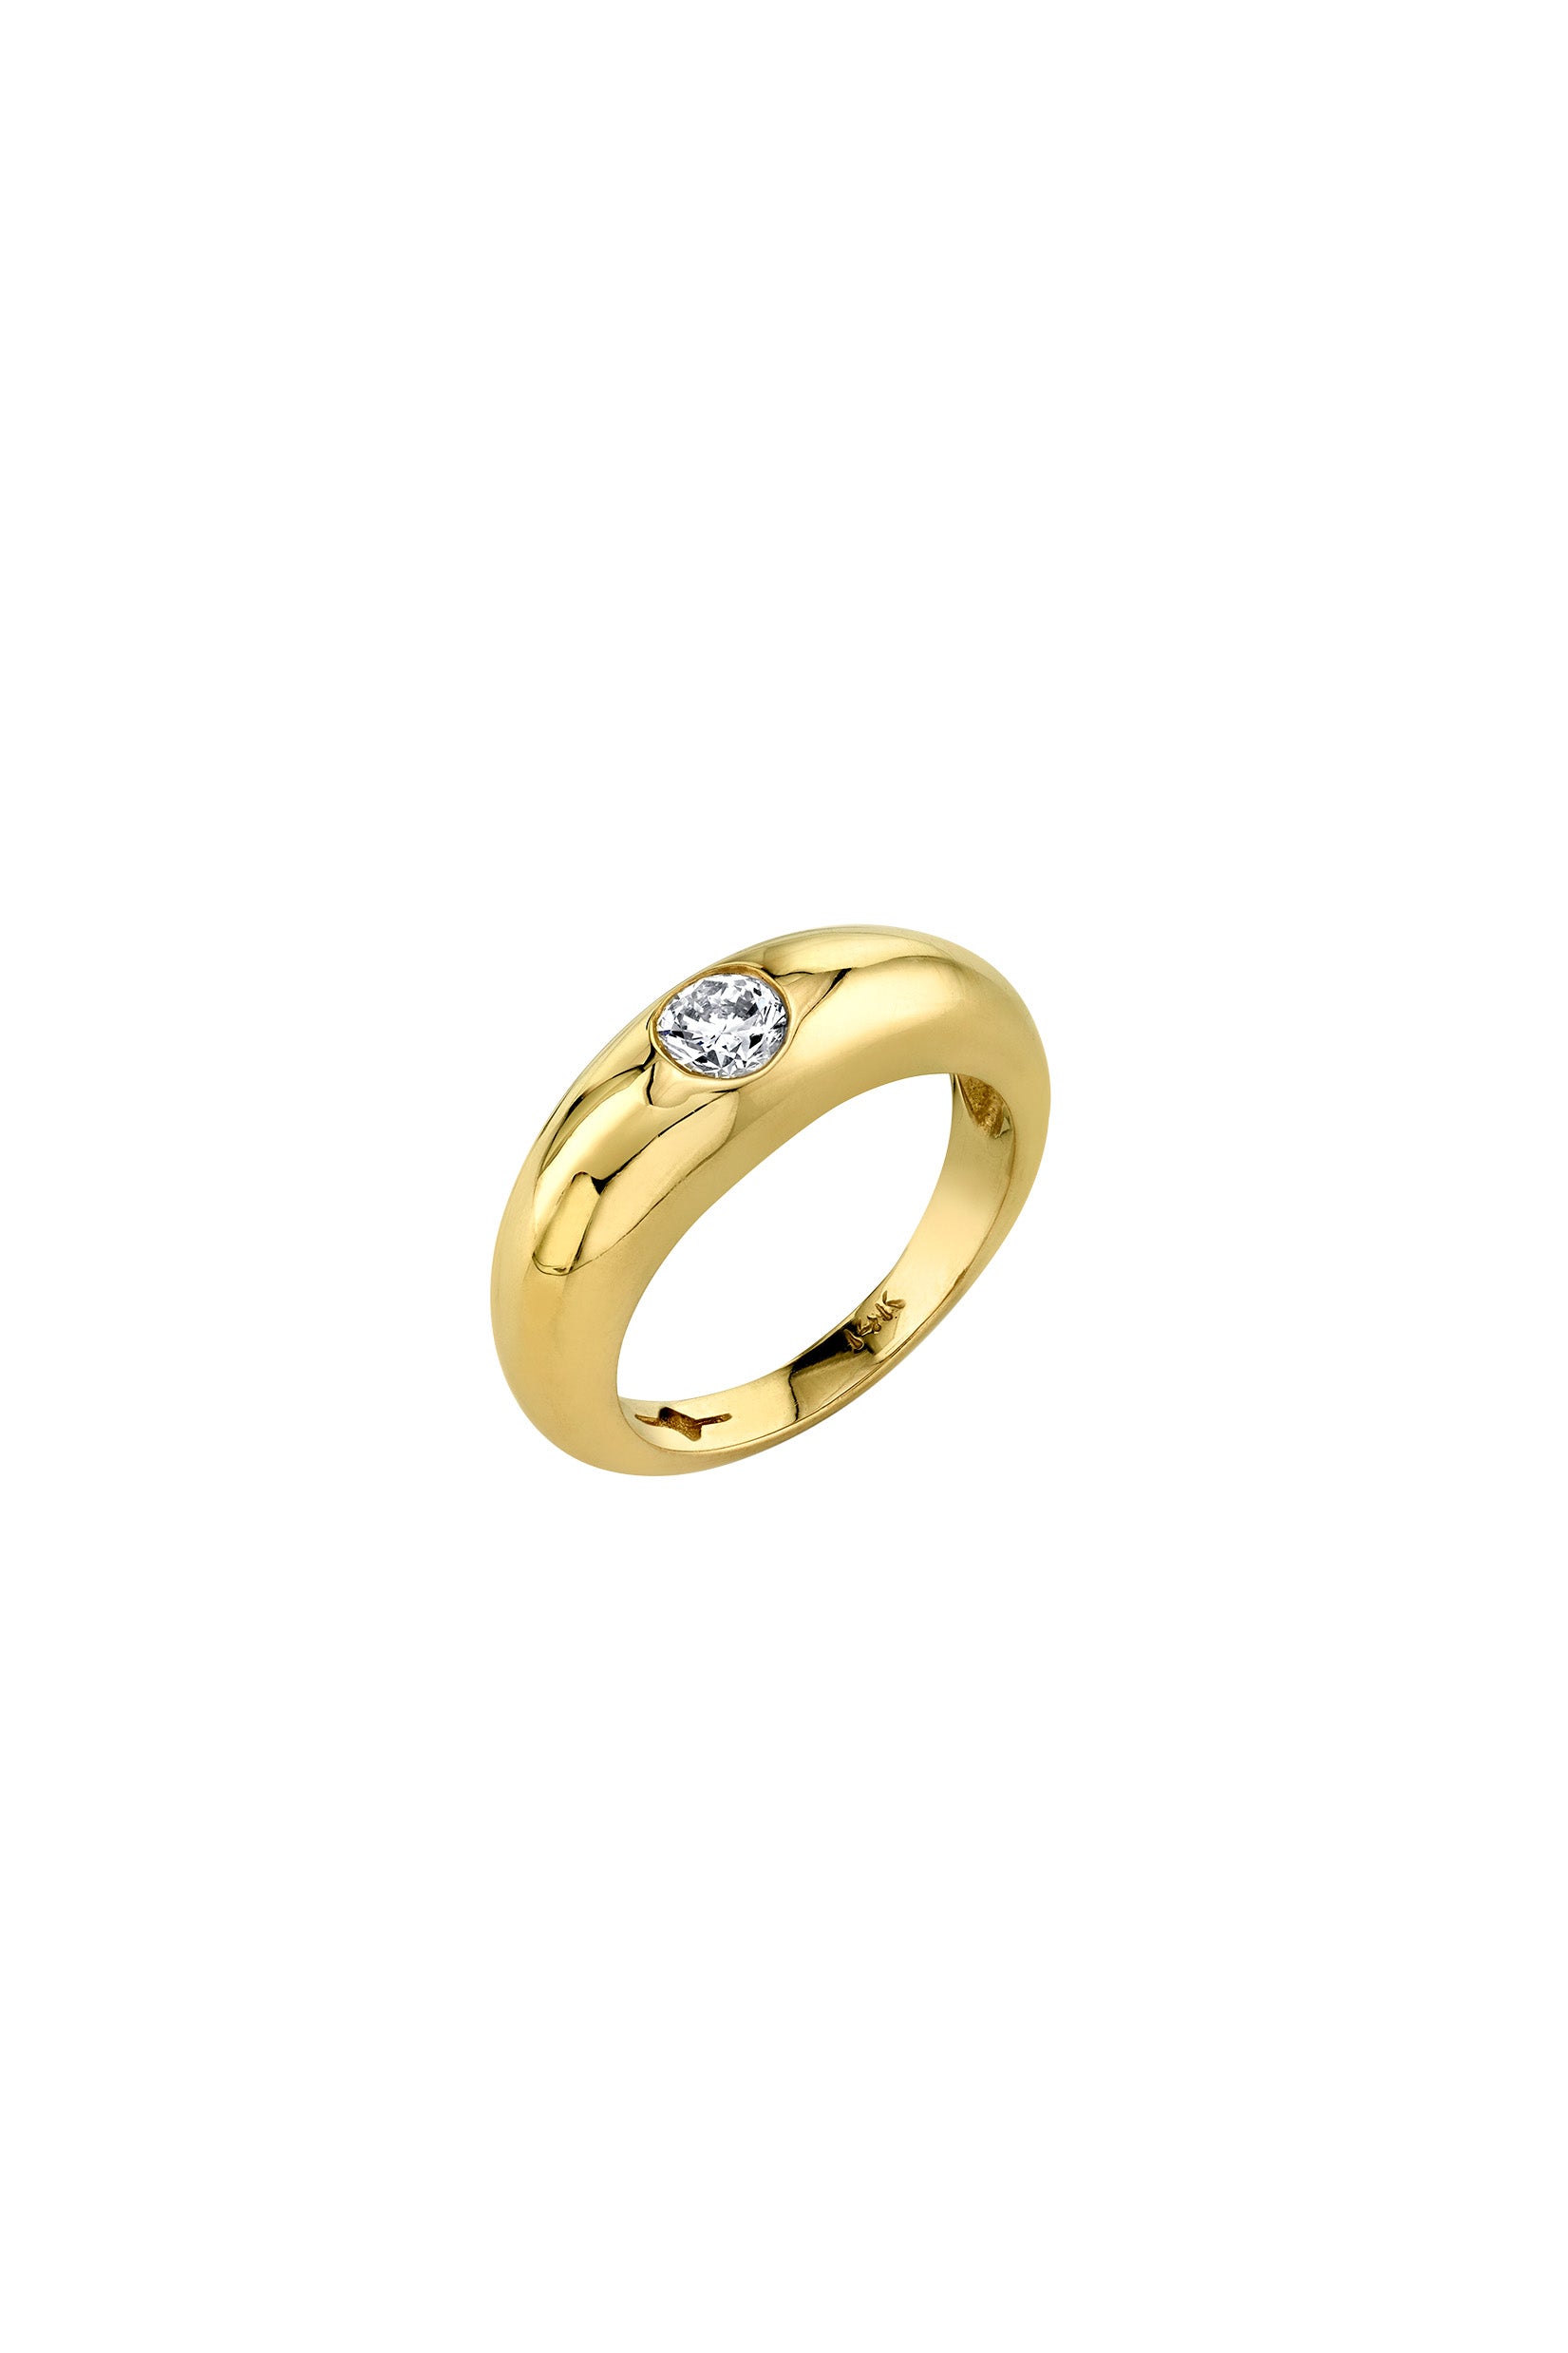 Small Balloon Ring with White Diamond in 14K Yellow Gold